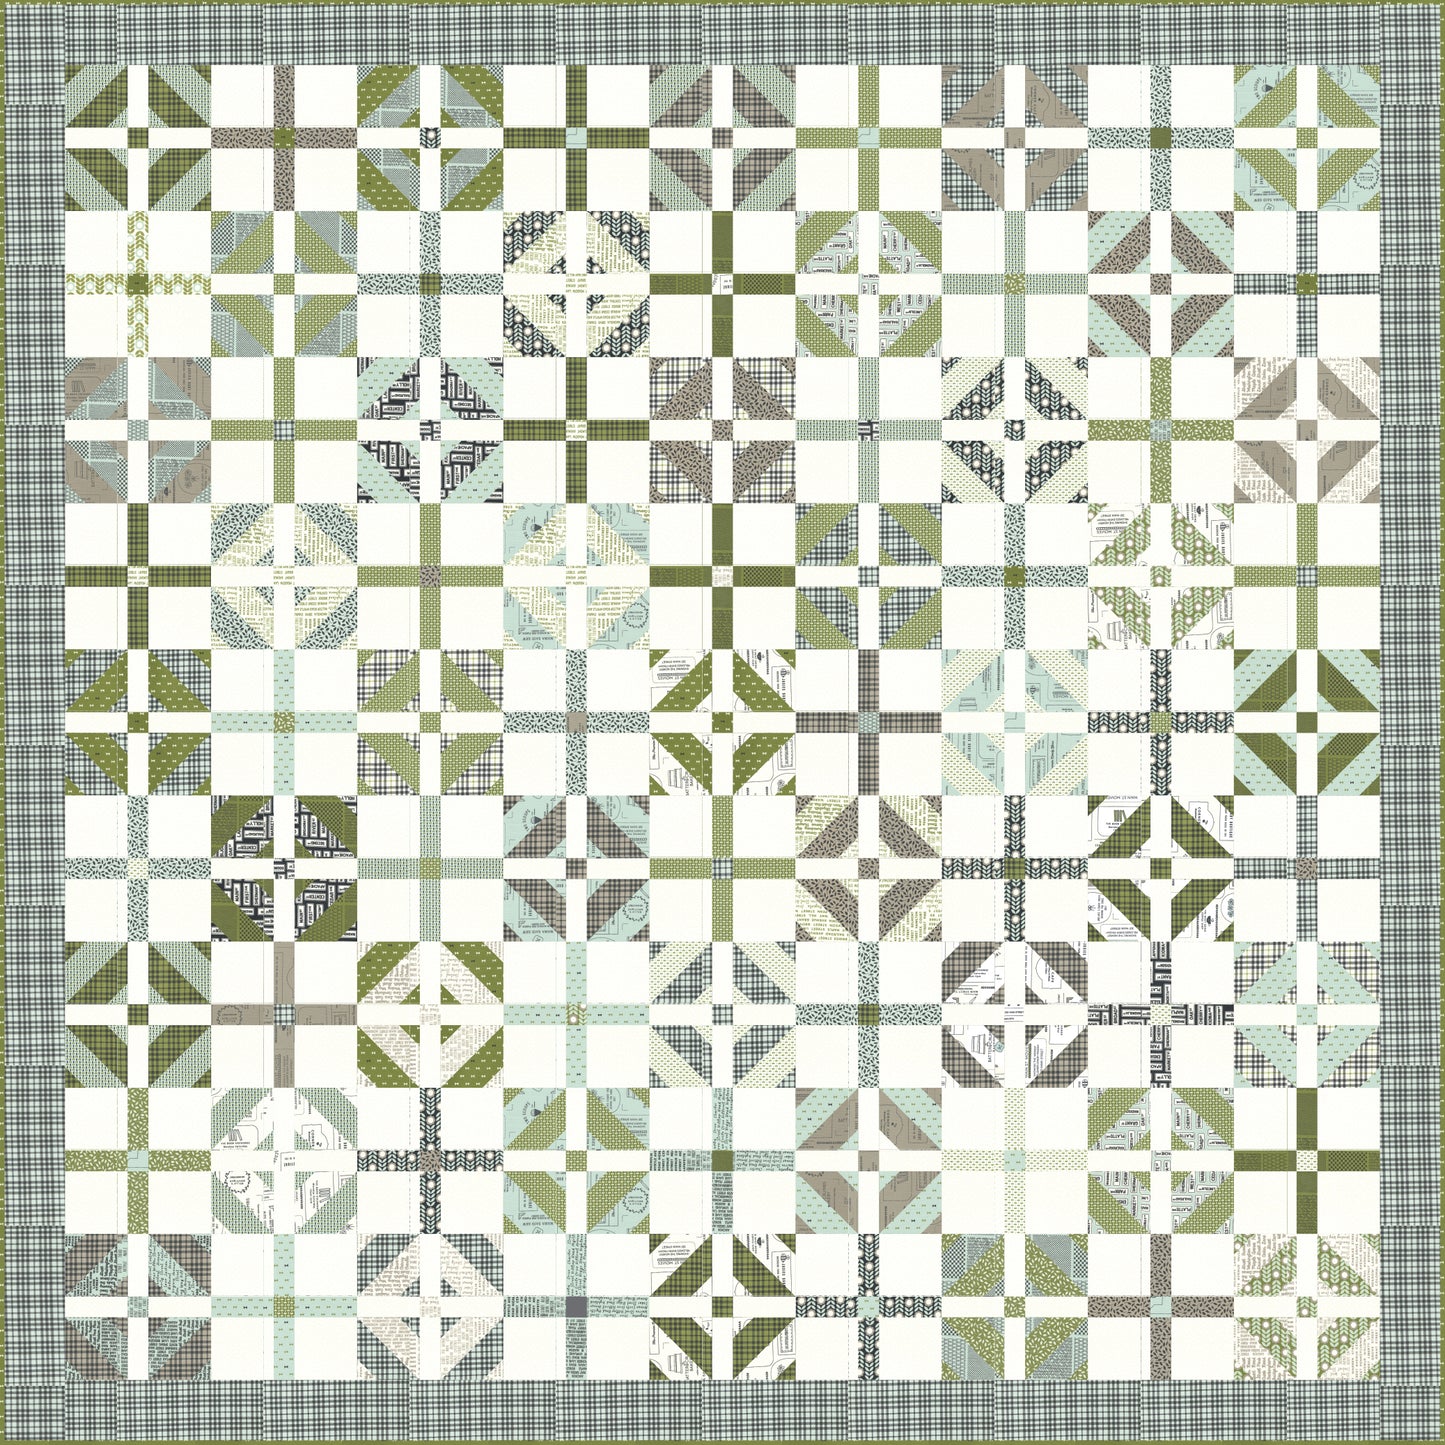 City Centre Quilt Pattern by Sweetwater